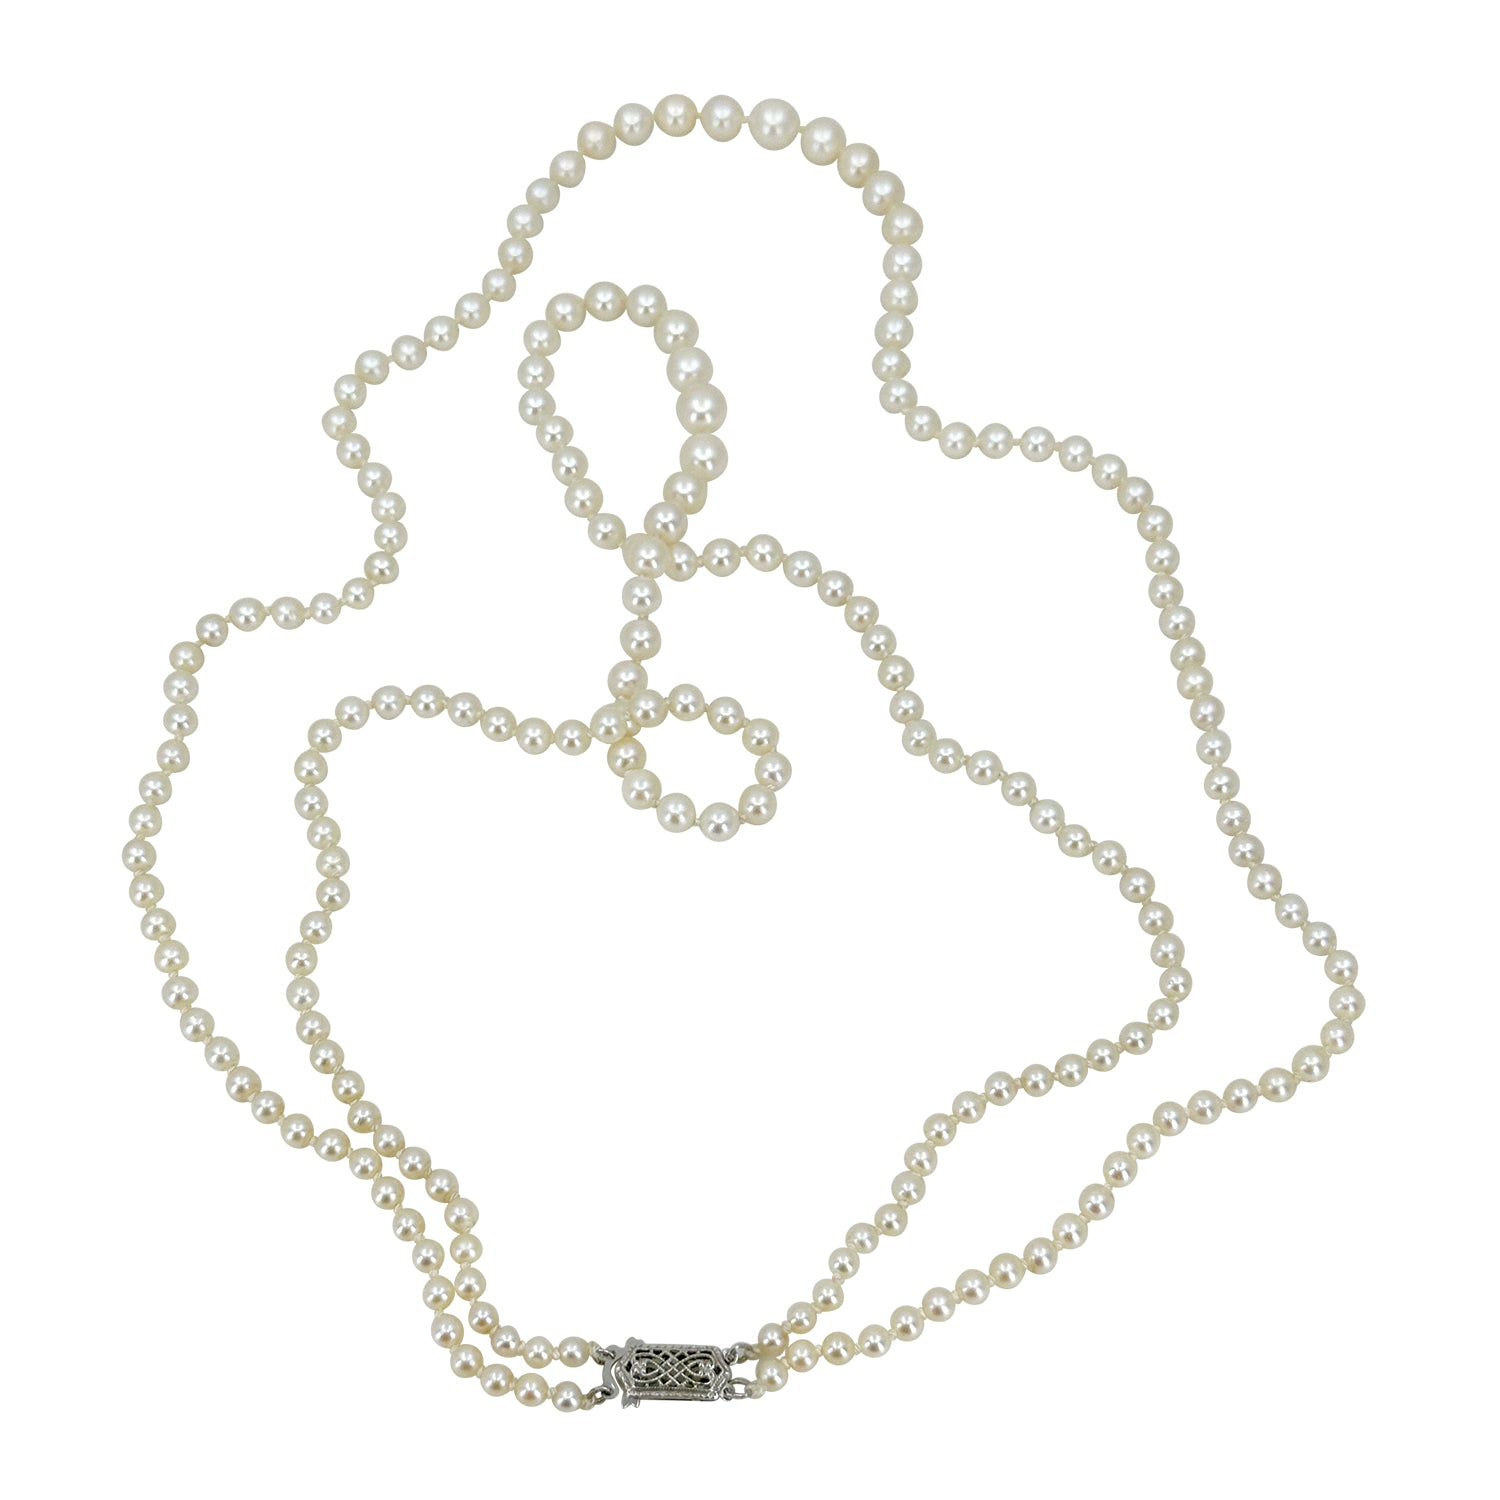 Akoya Double Strand Graduated Filigree Japanese Saltwater Cultured Akoya Pearl Vintage Necklace - 14K White Gold 20 & 21 Inc